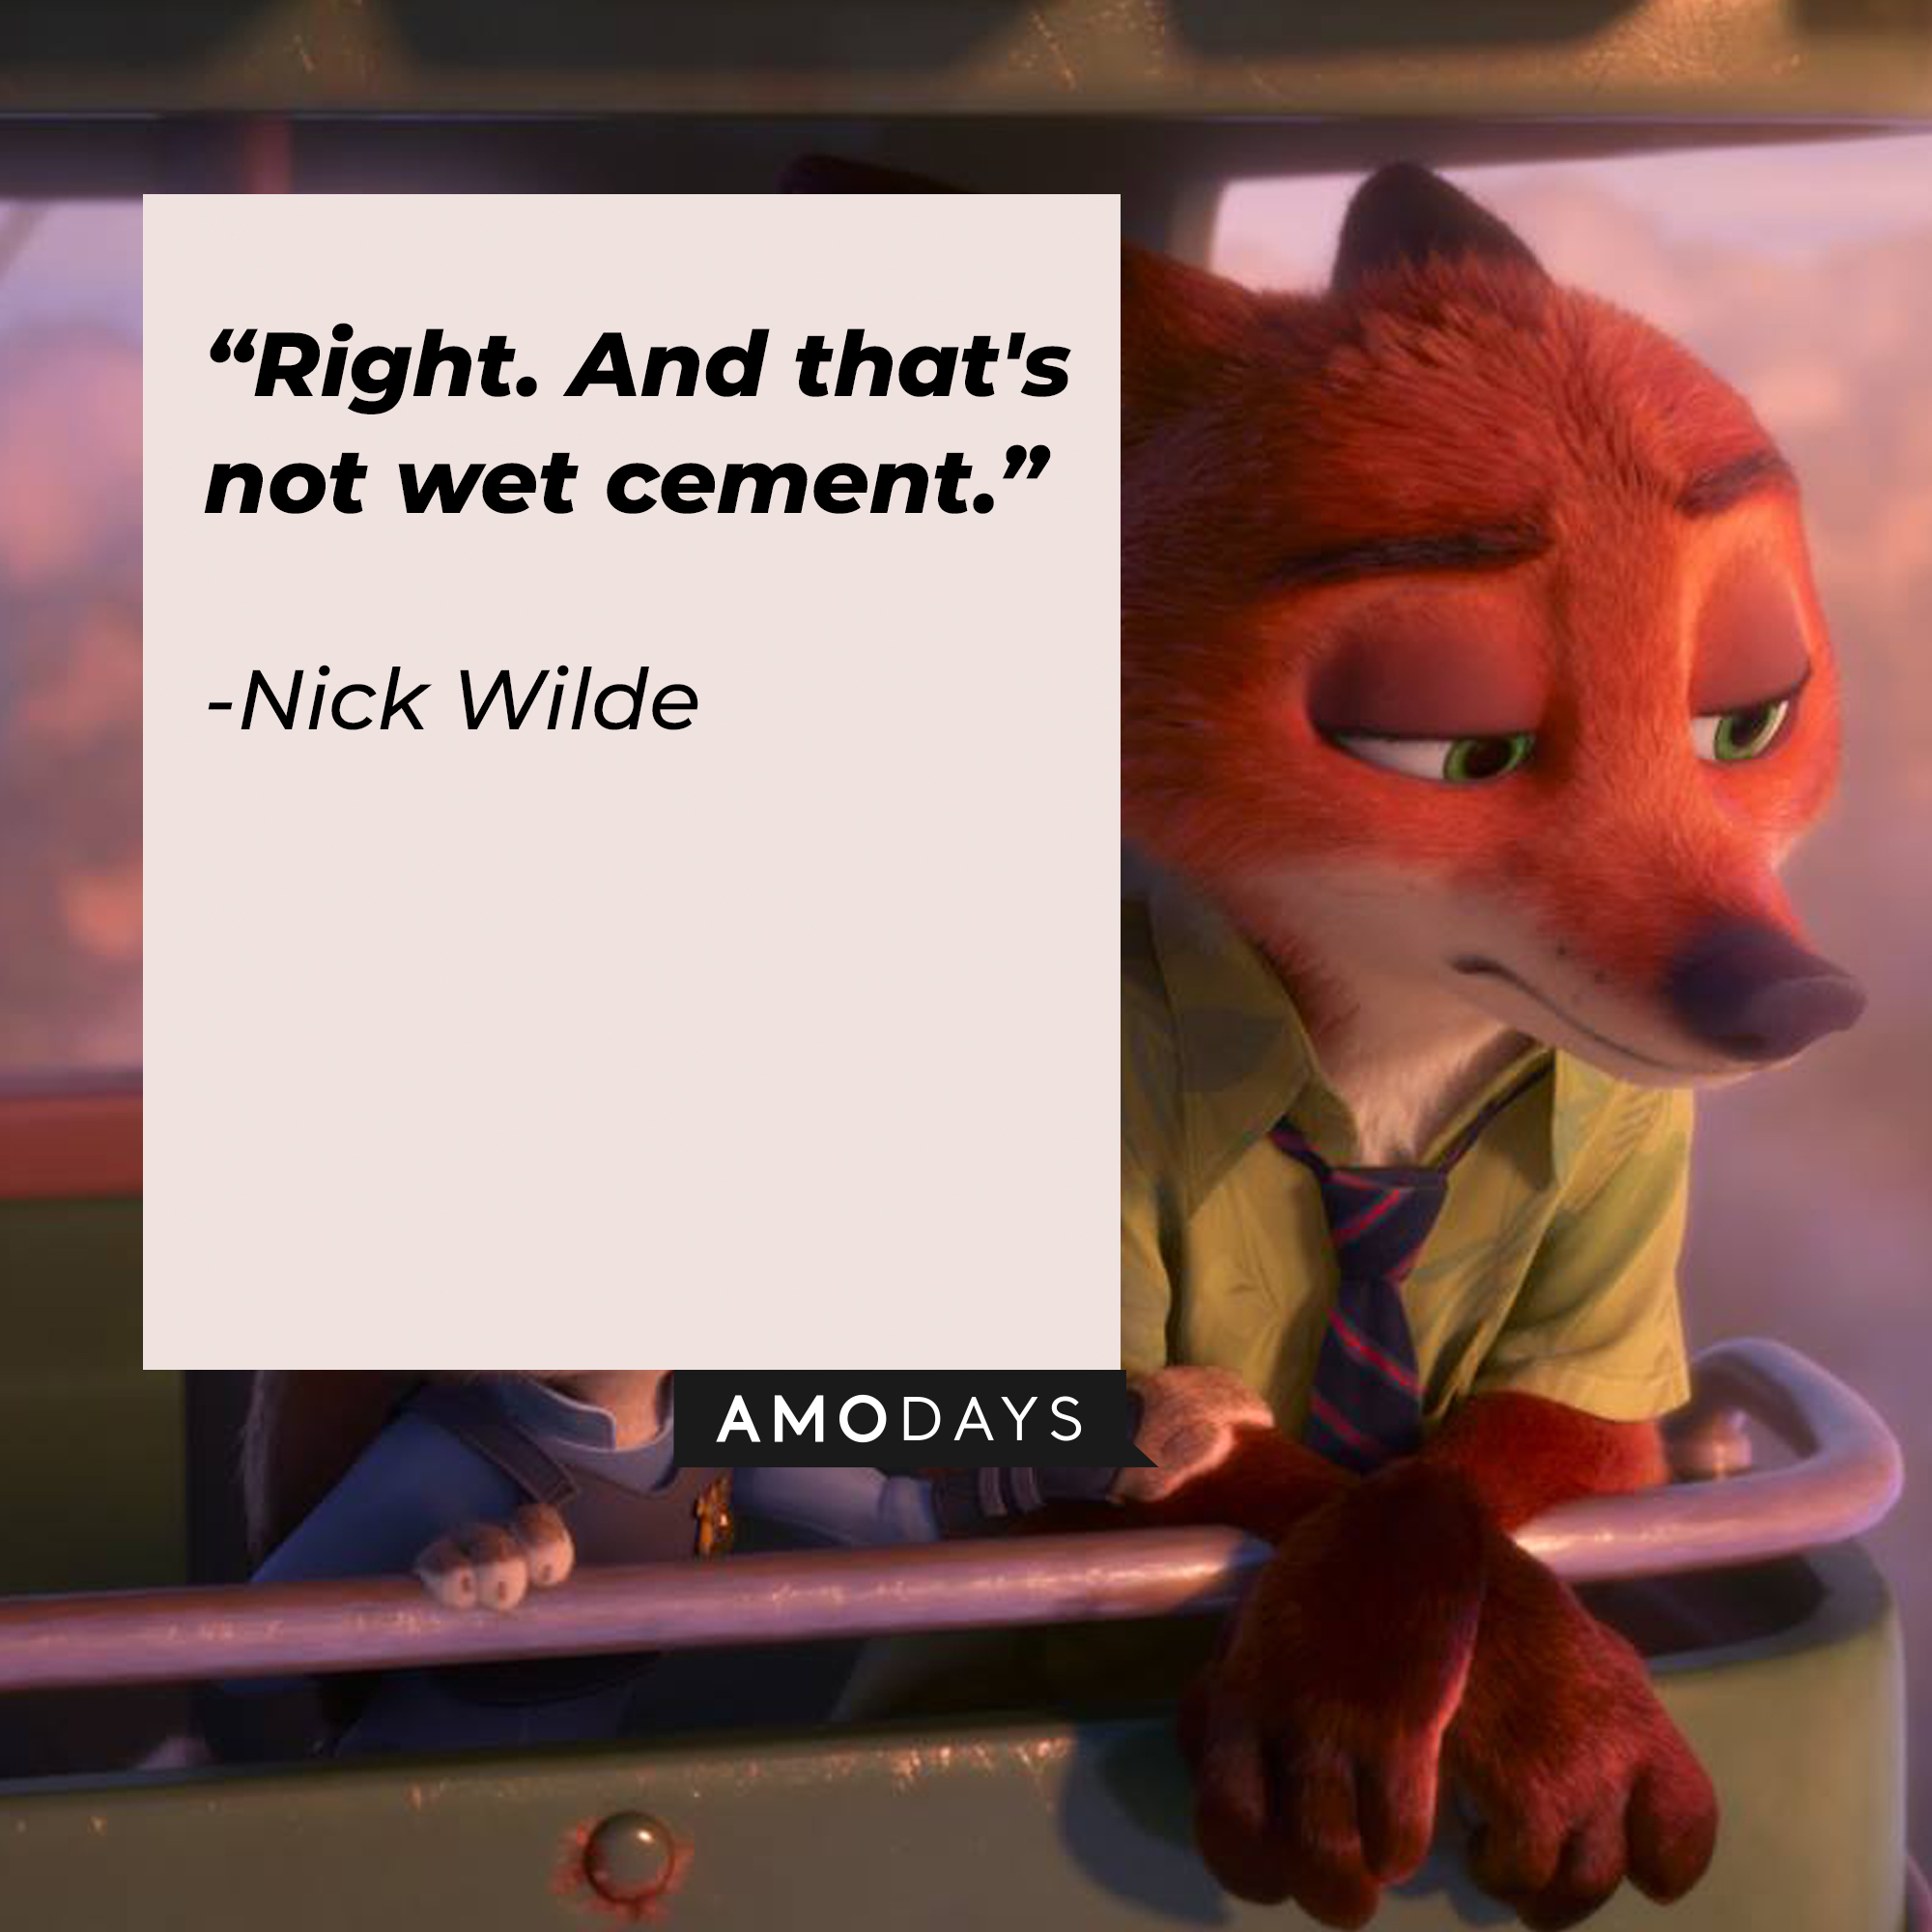 Nick Wilde, with his quote: “Right. And that's not wet cement.” | Source: facebook.com/DisneyZootopia